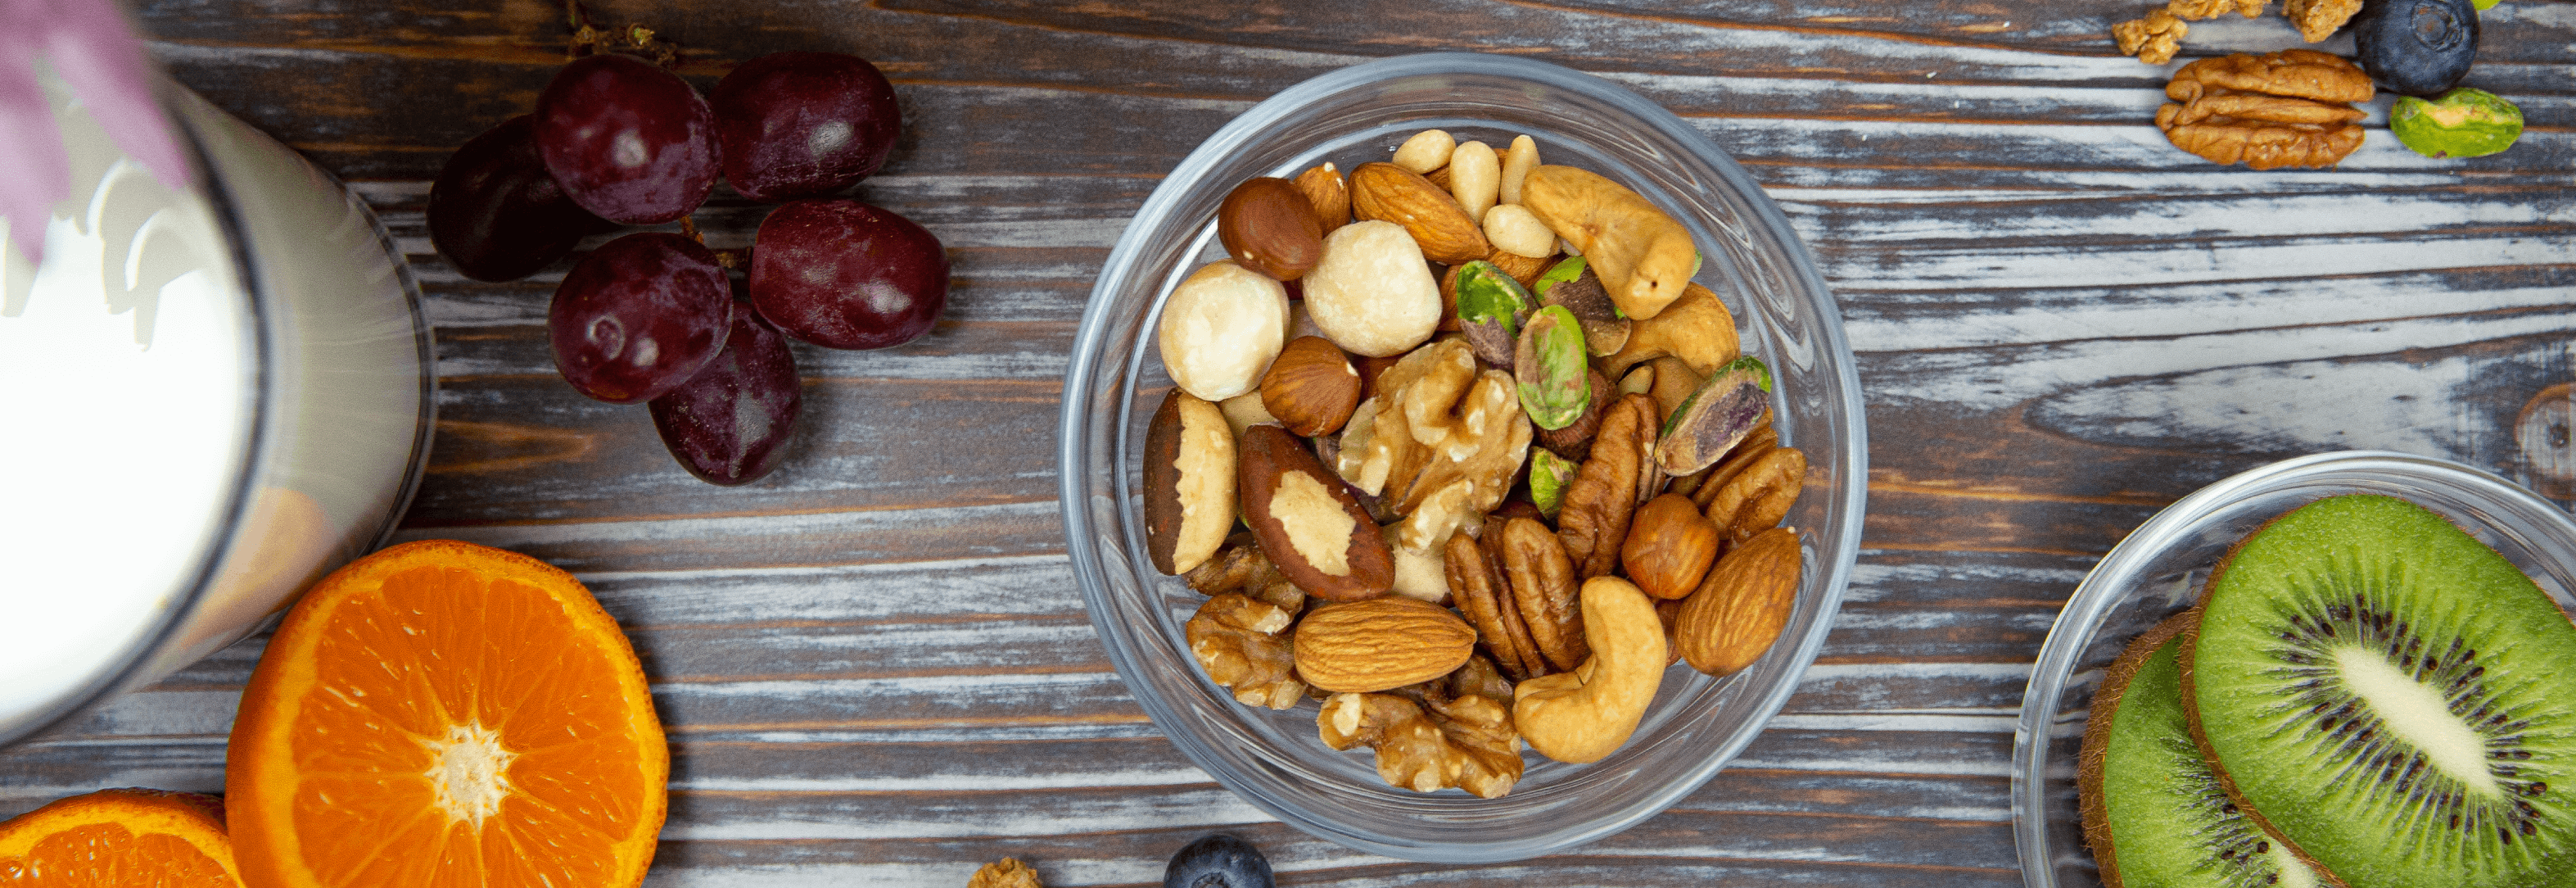 Stay Energized with Nuts